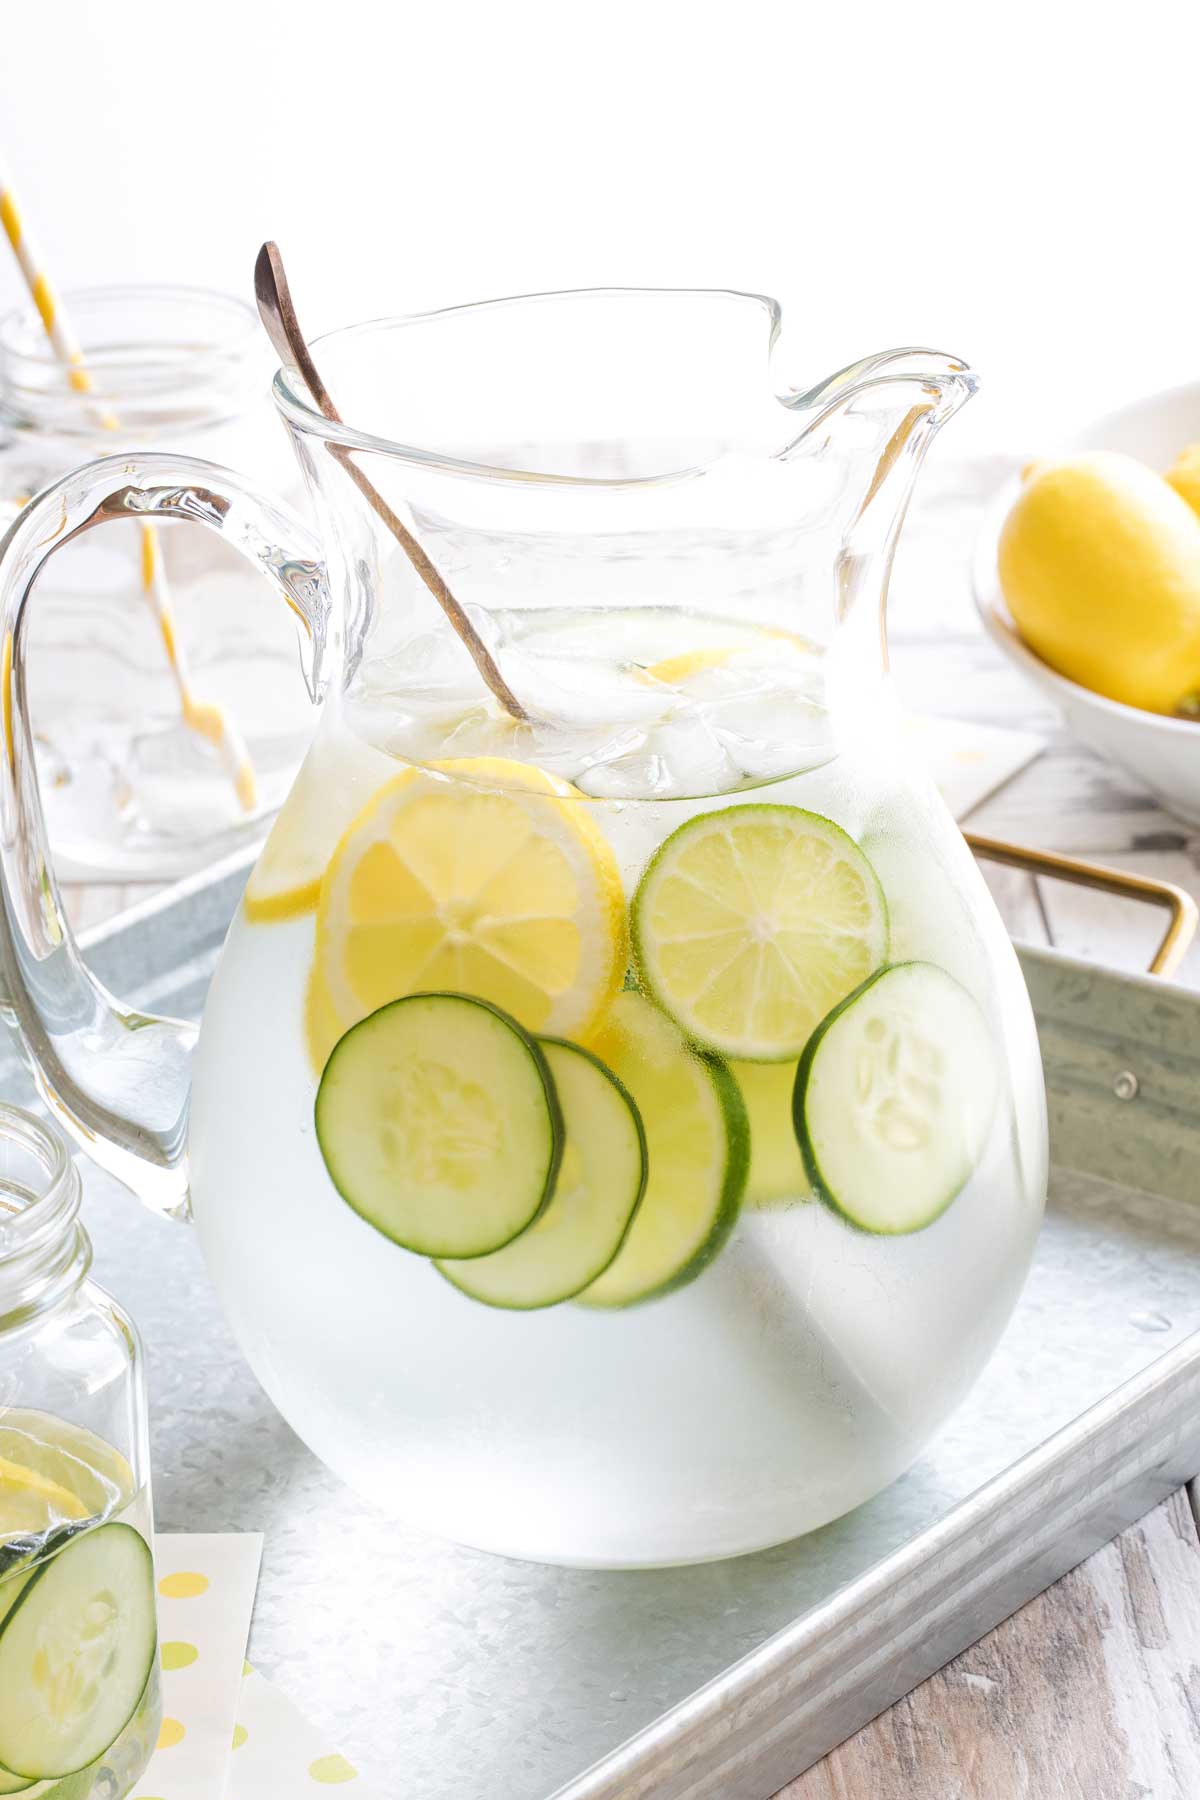 Condensation-covered pitcher of this water recipe, with spoon in it, plus slices of cucumber, lemons and limes and melting ice cubes, sitting on metal picnic tray.